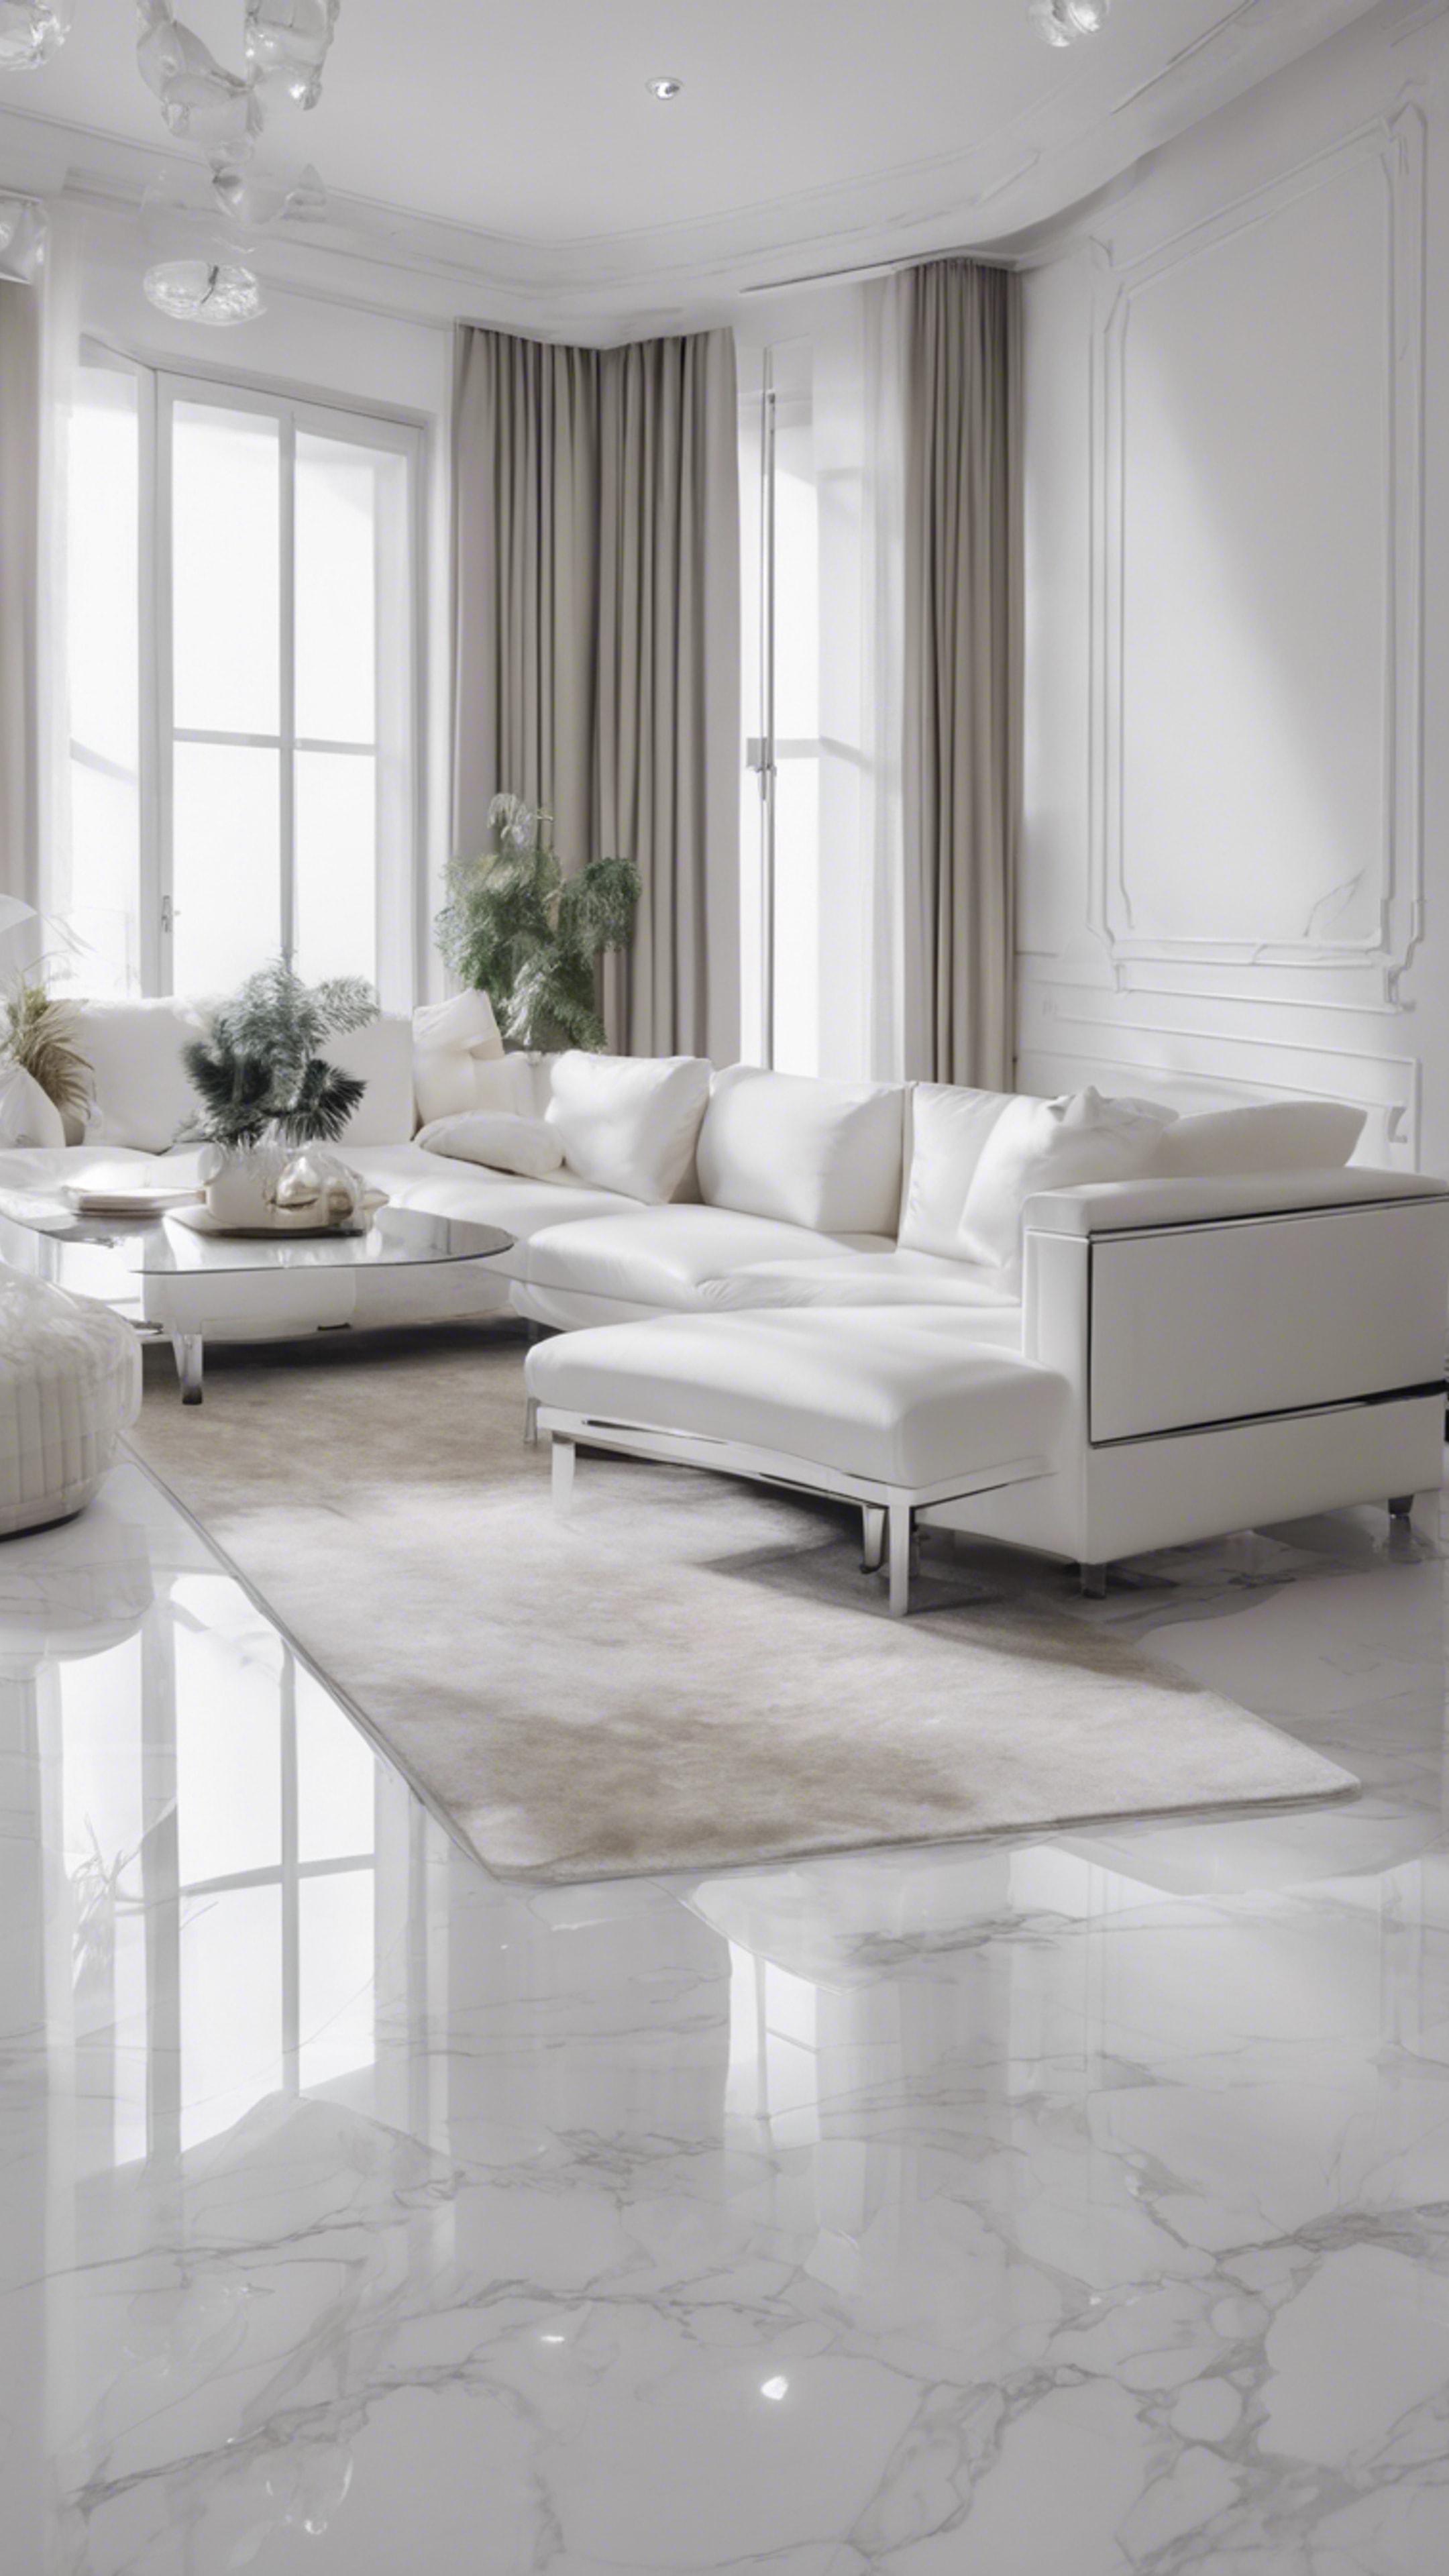 An ultra-modern minimalist interior design of a living room, with cool white walls, silver furniture and white marble floors. Тапет[0b803decb0d241b99c2a]